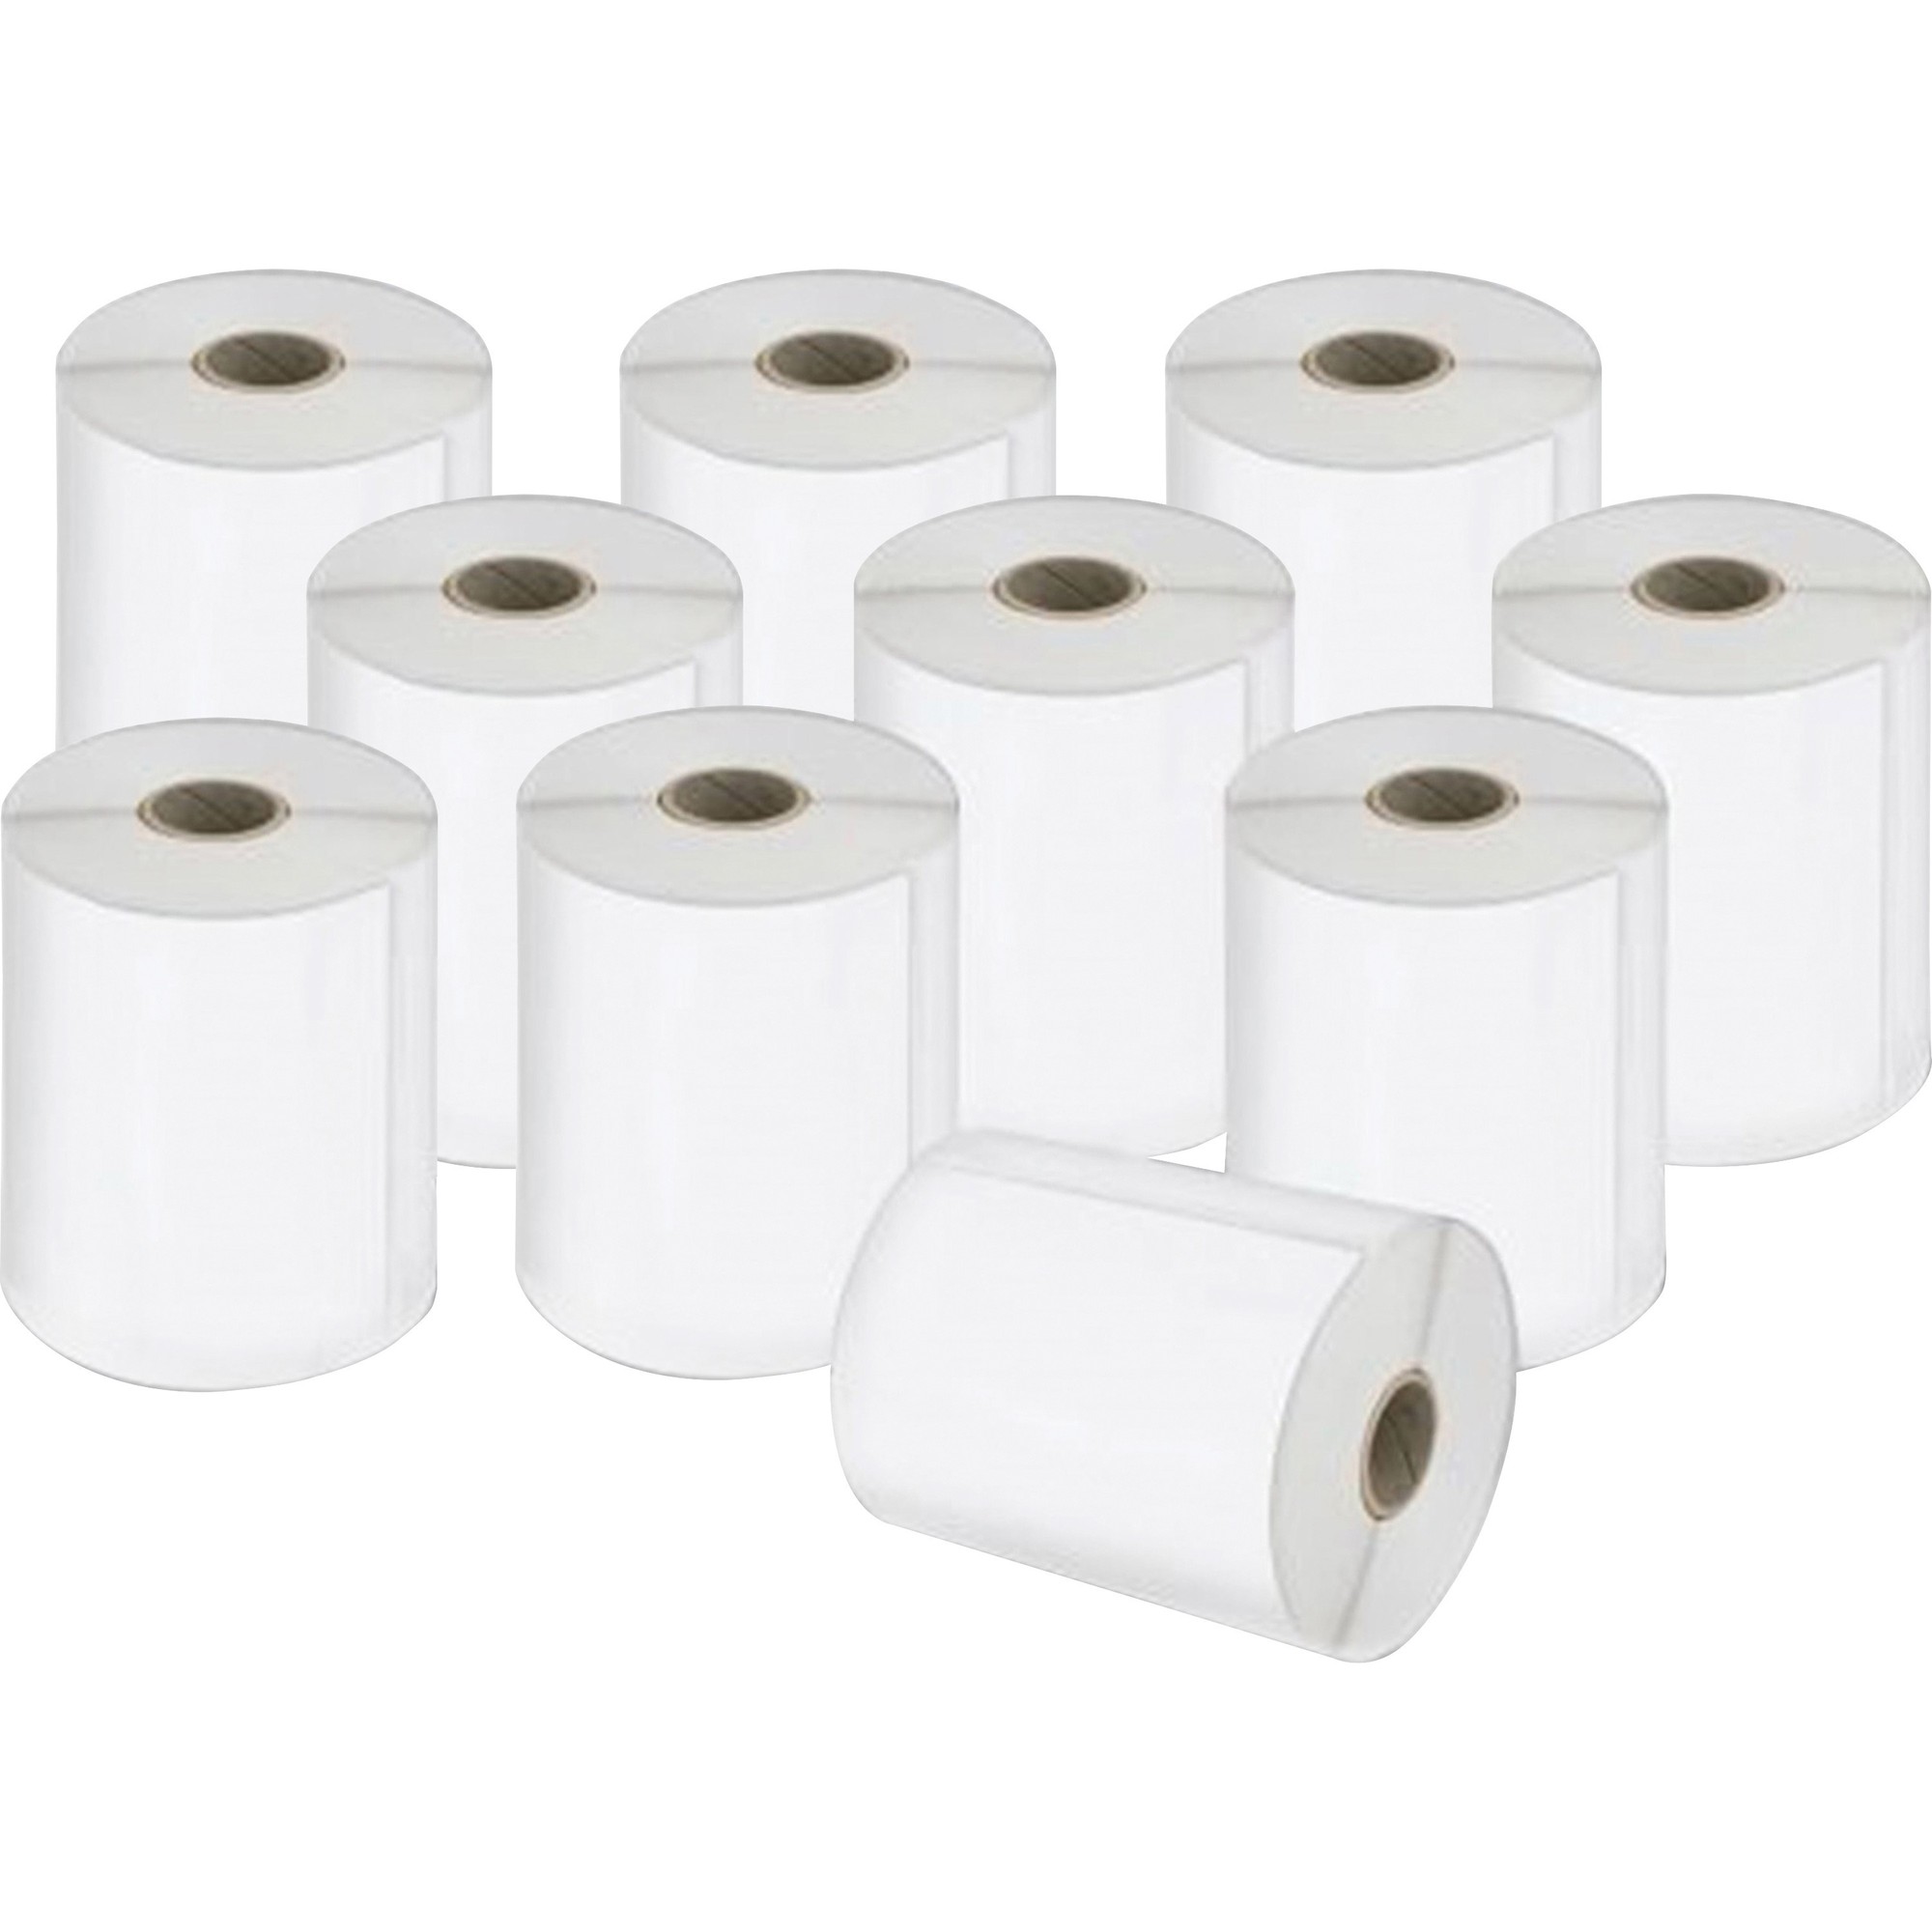 Dymo LabelWriter 4XL Label Printer Label Roll - 4" x 6" Length - Rectangle - White - 2200 / Pack